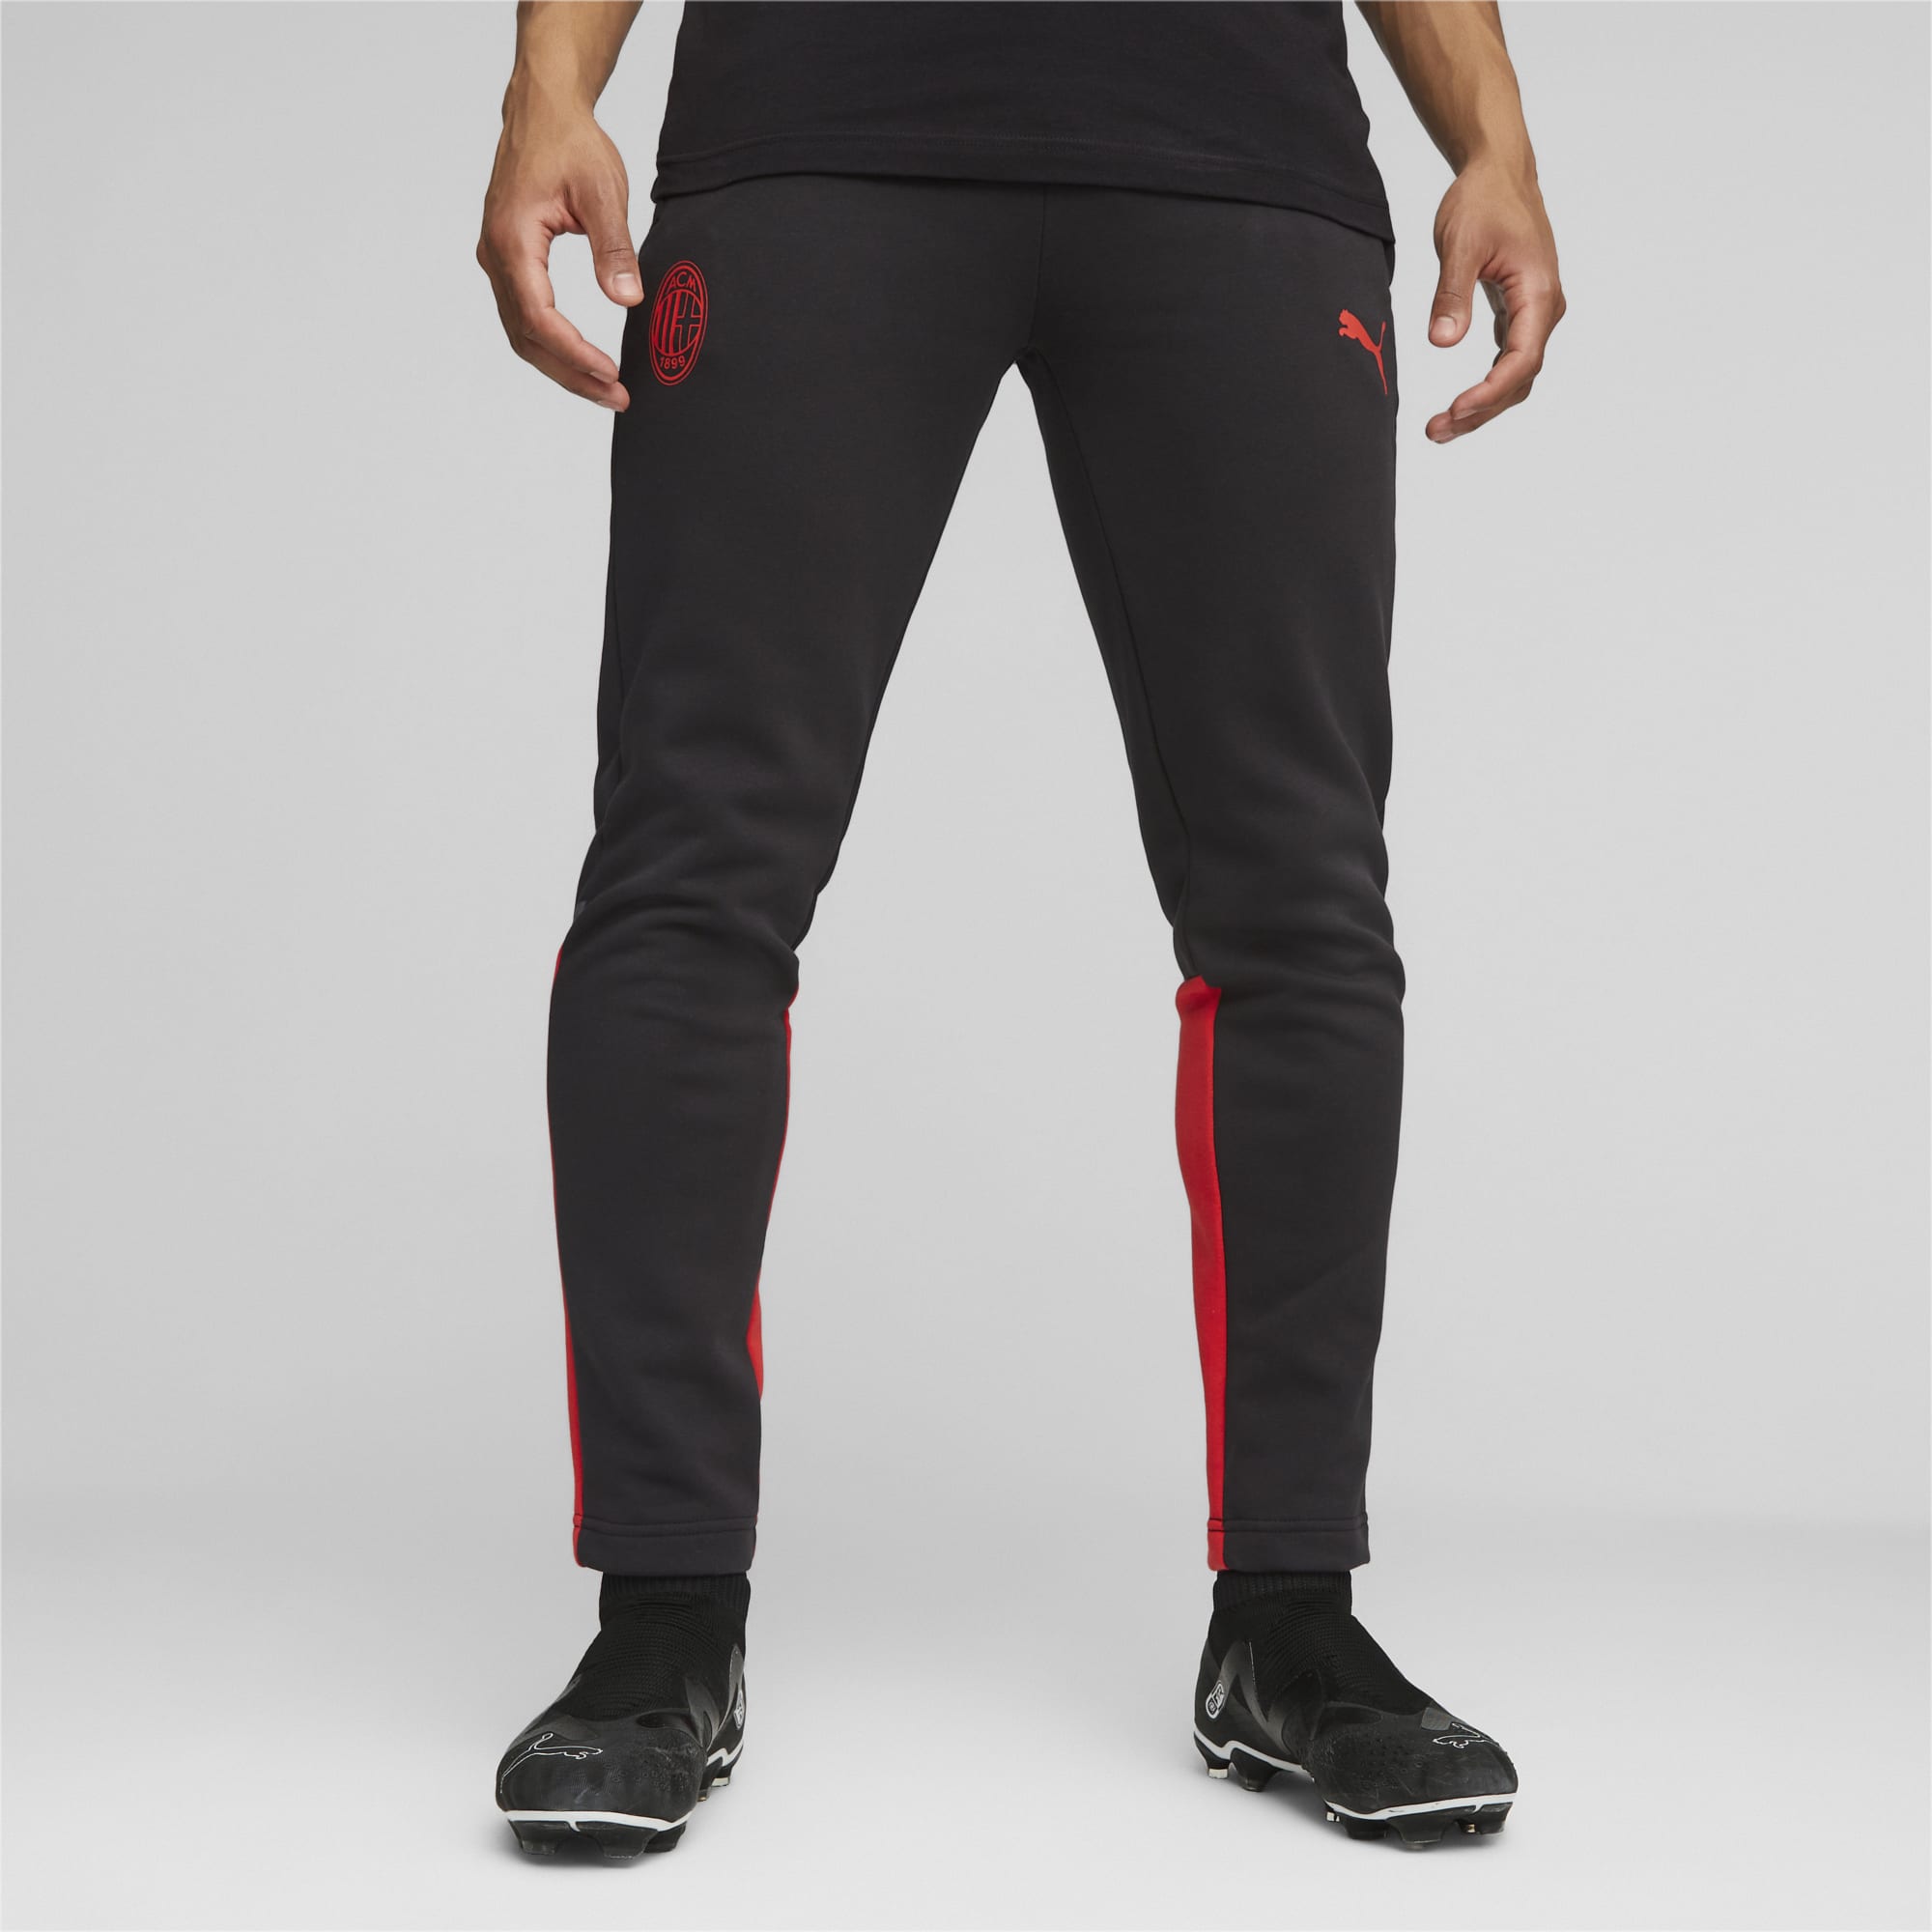 Men's PUMA AC Milan Football Casuals Sweatpants, Black/For All Time Red